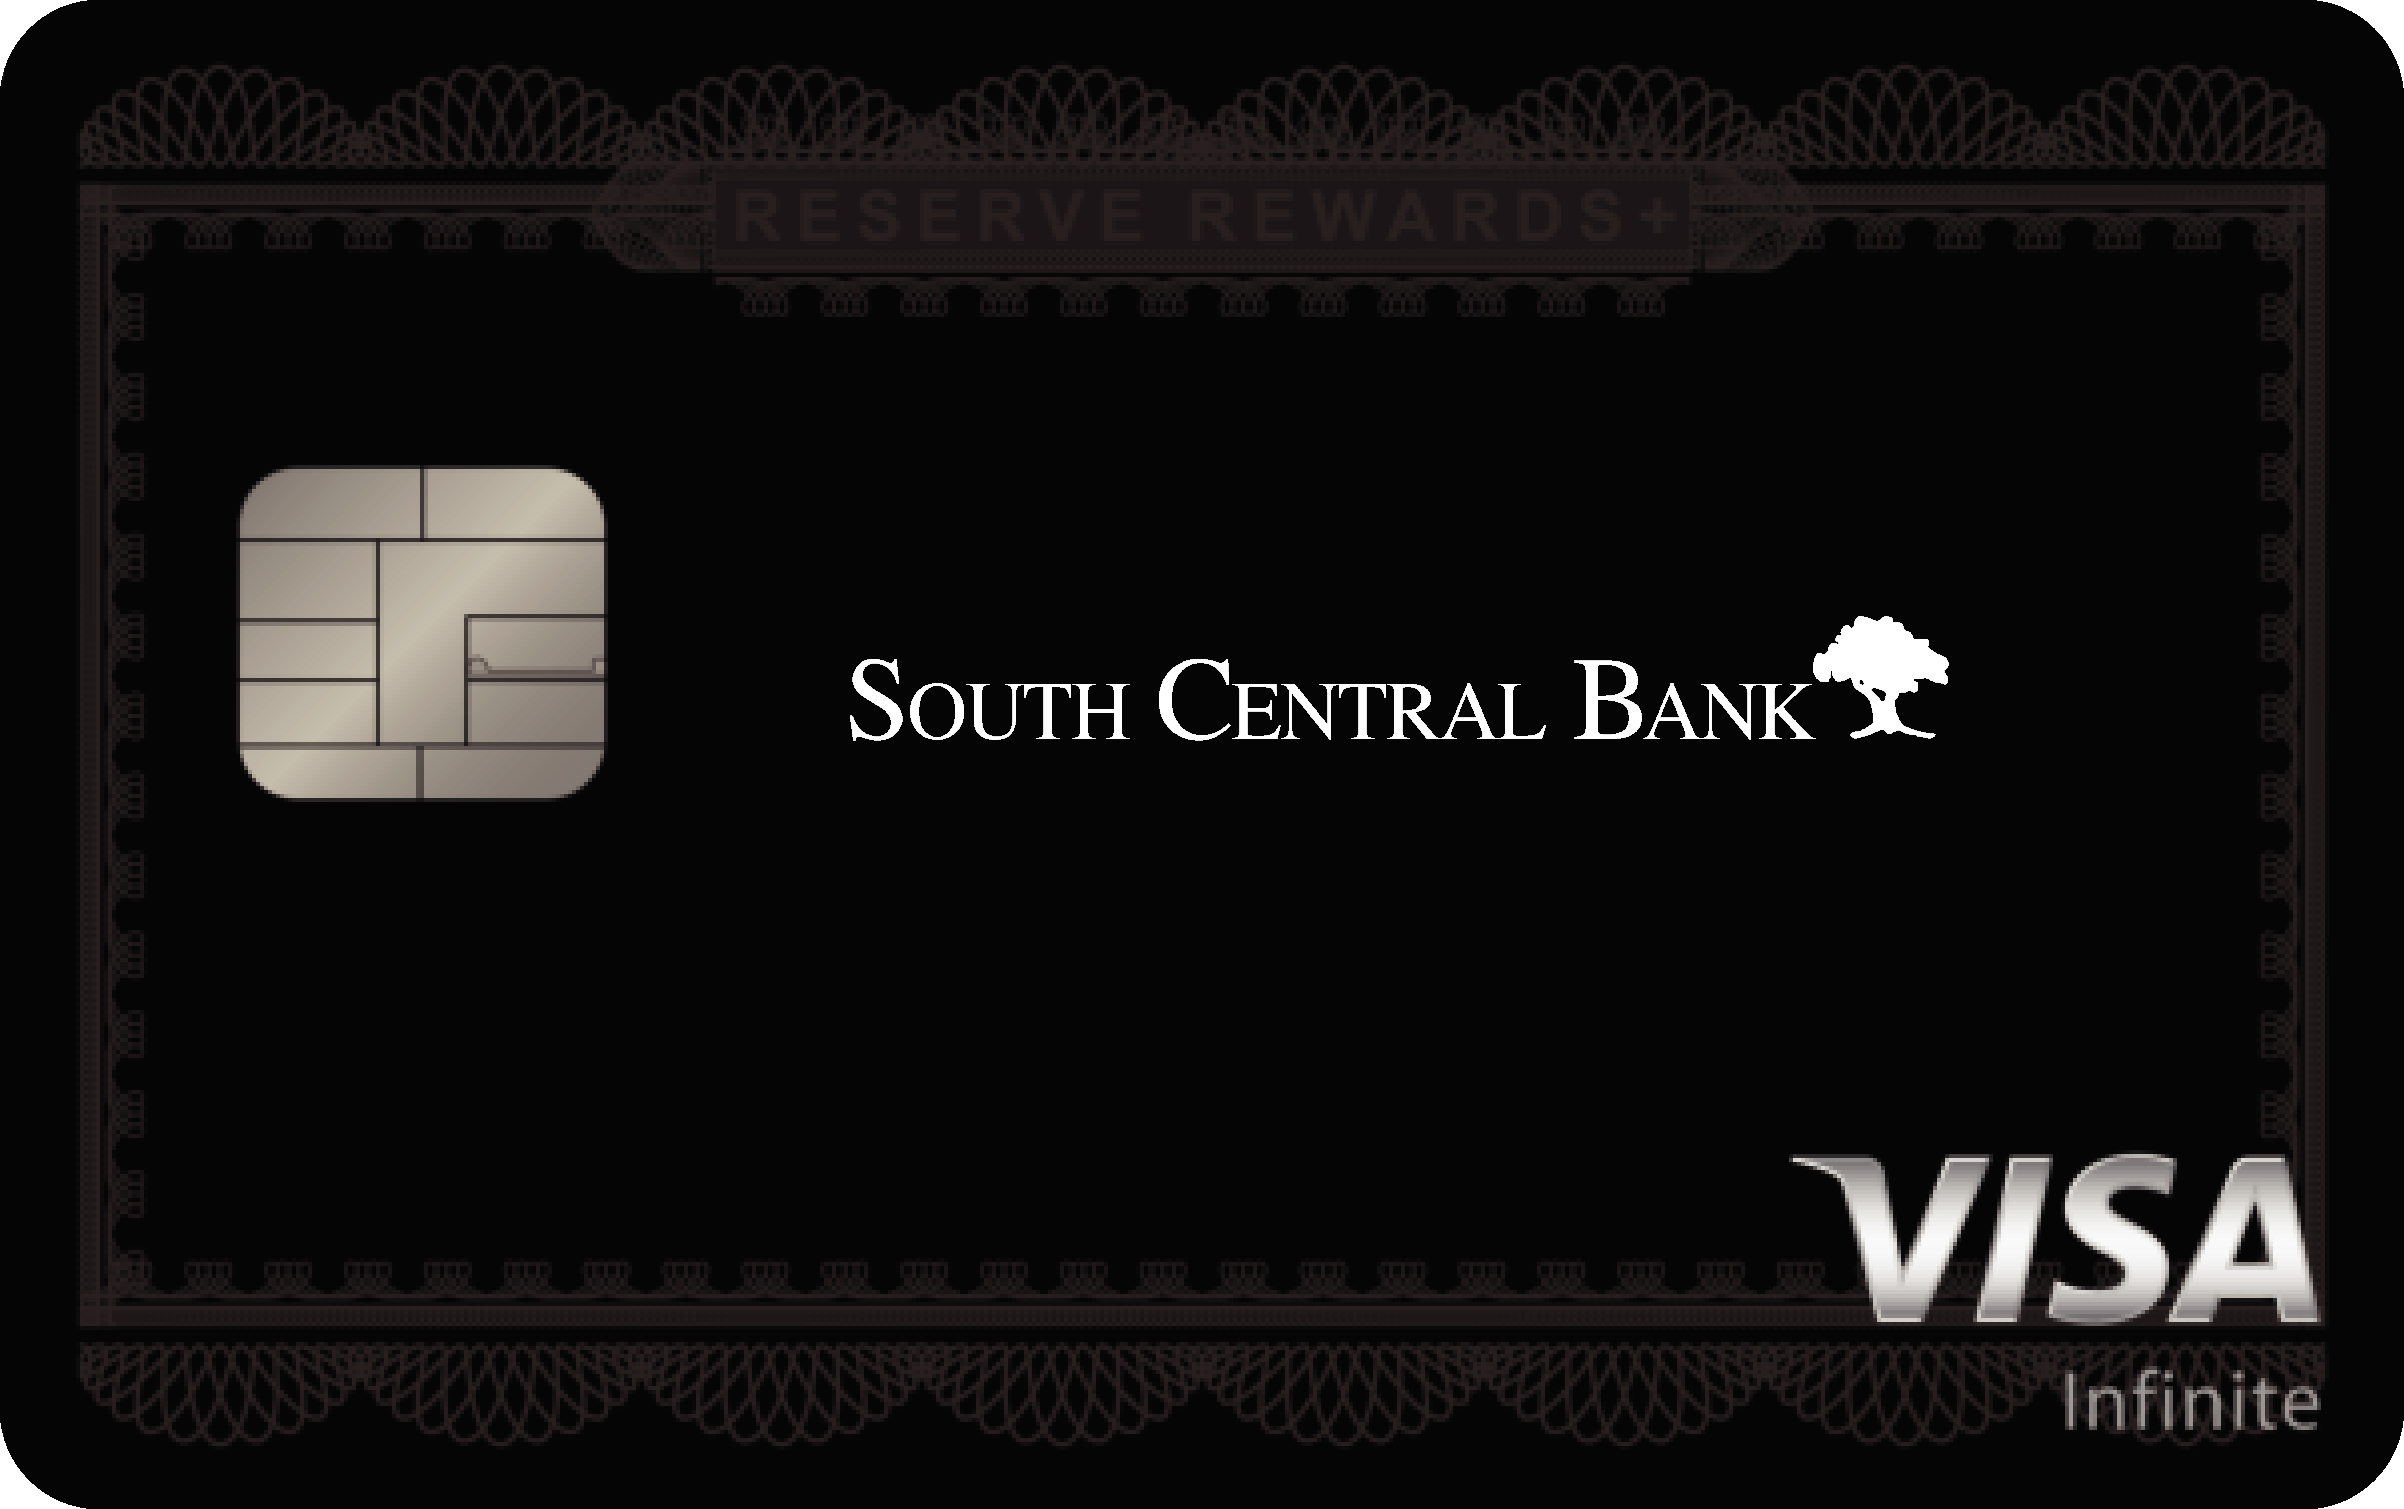 South Central Bank Inc